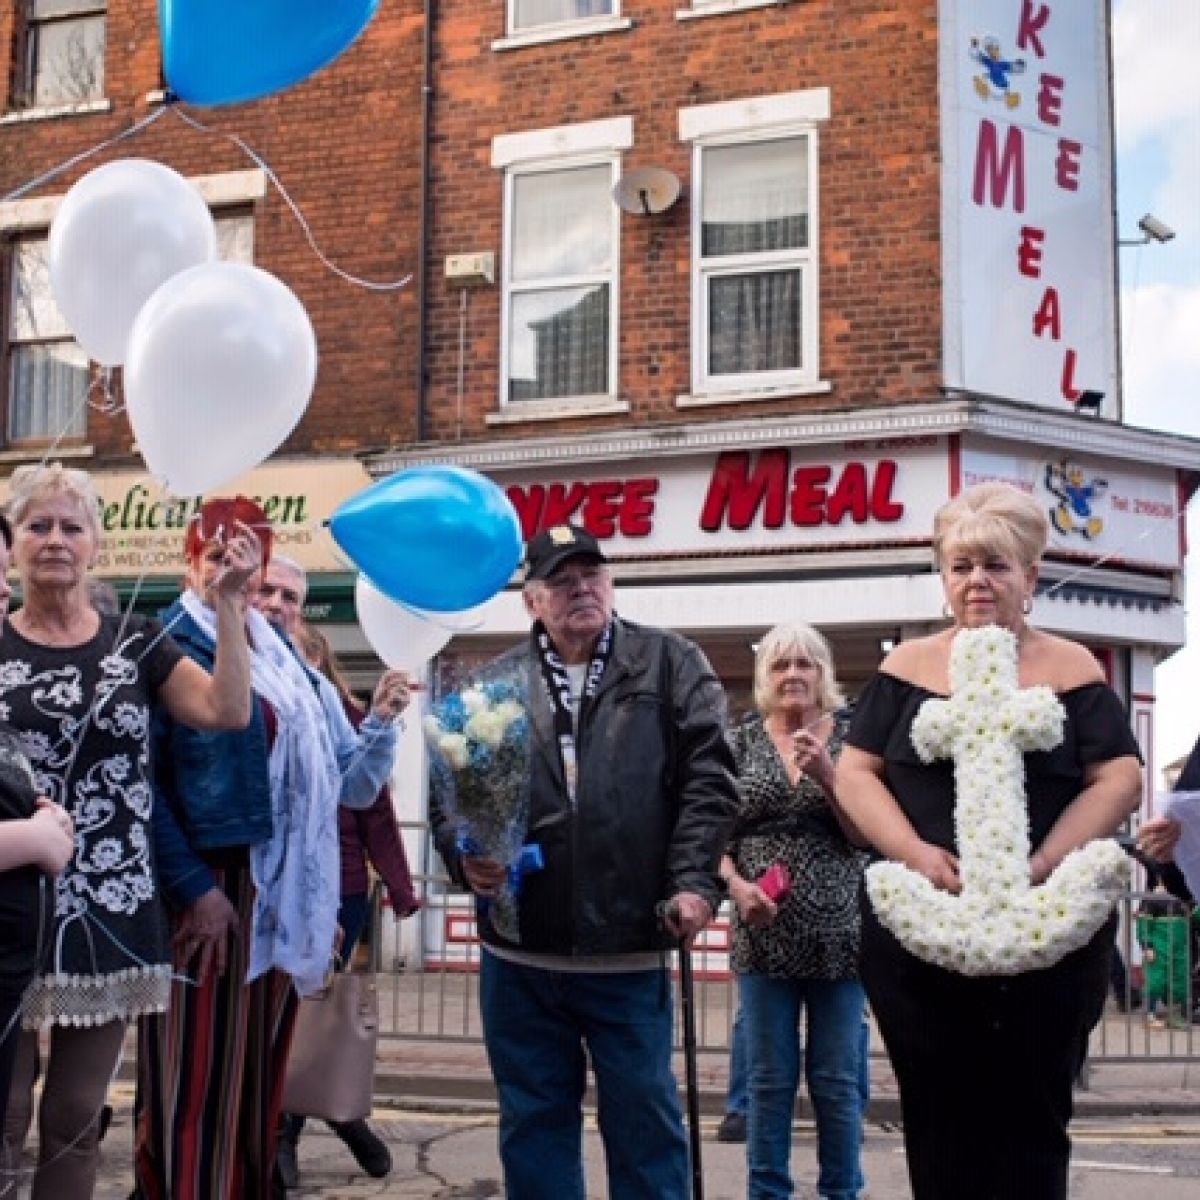 Rayners hold a memorial for the lost trawler the Gaul. The whole of Hessle Road brought to a stand still for a minute silence.